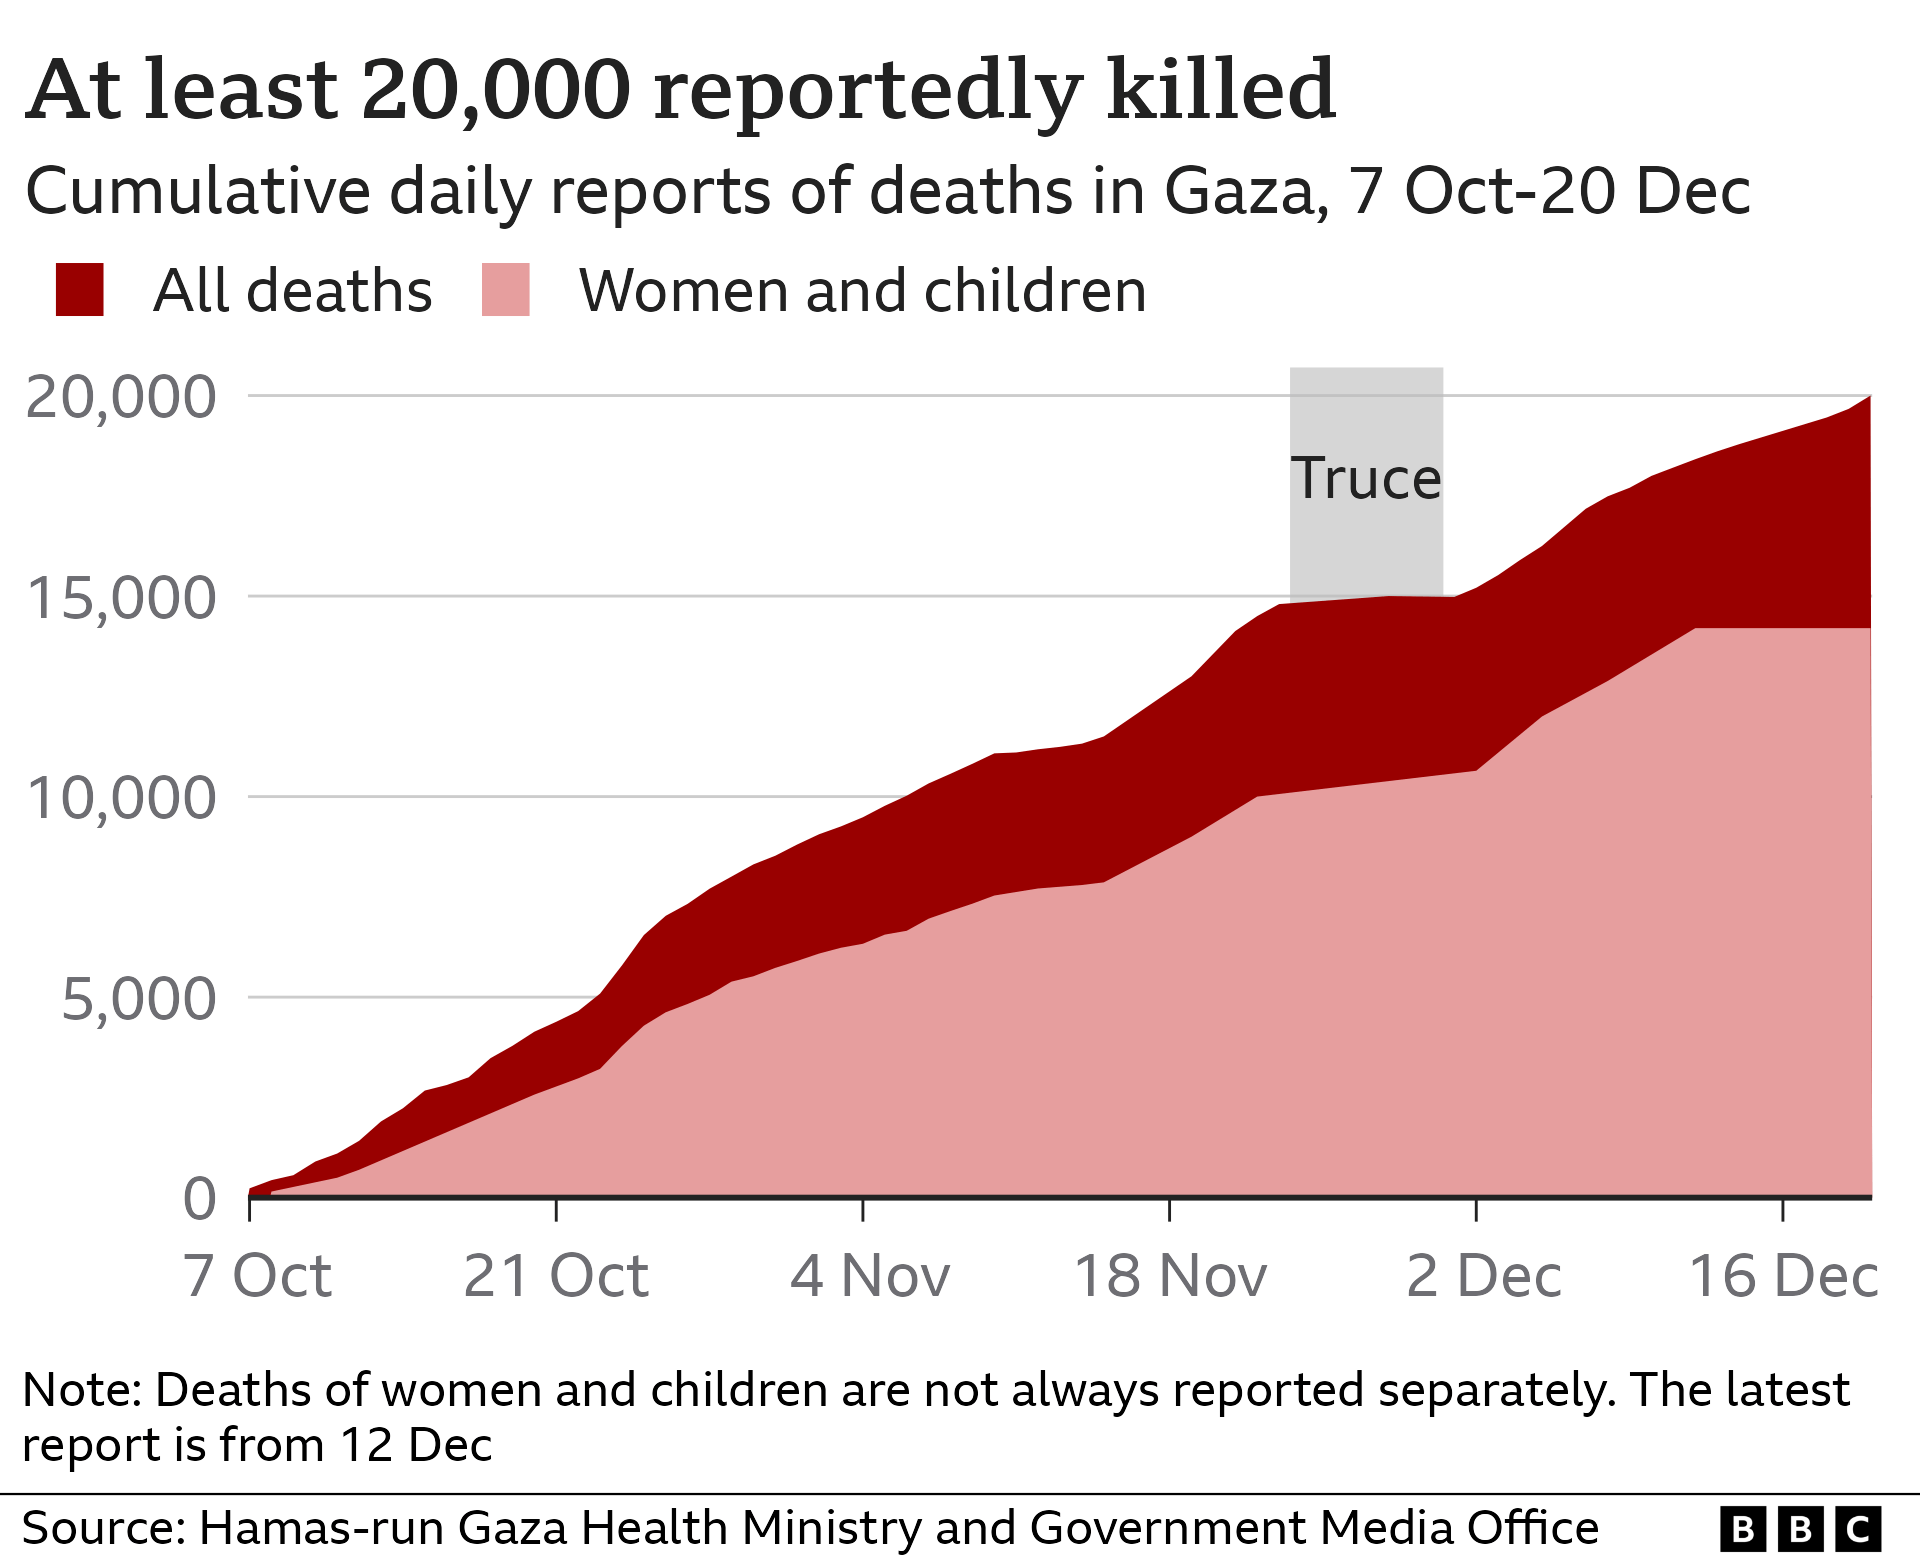 Chart showing cumulative daily reports of death in Gaza from 7 October to 20 December, when they pass 20,000.